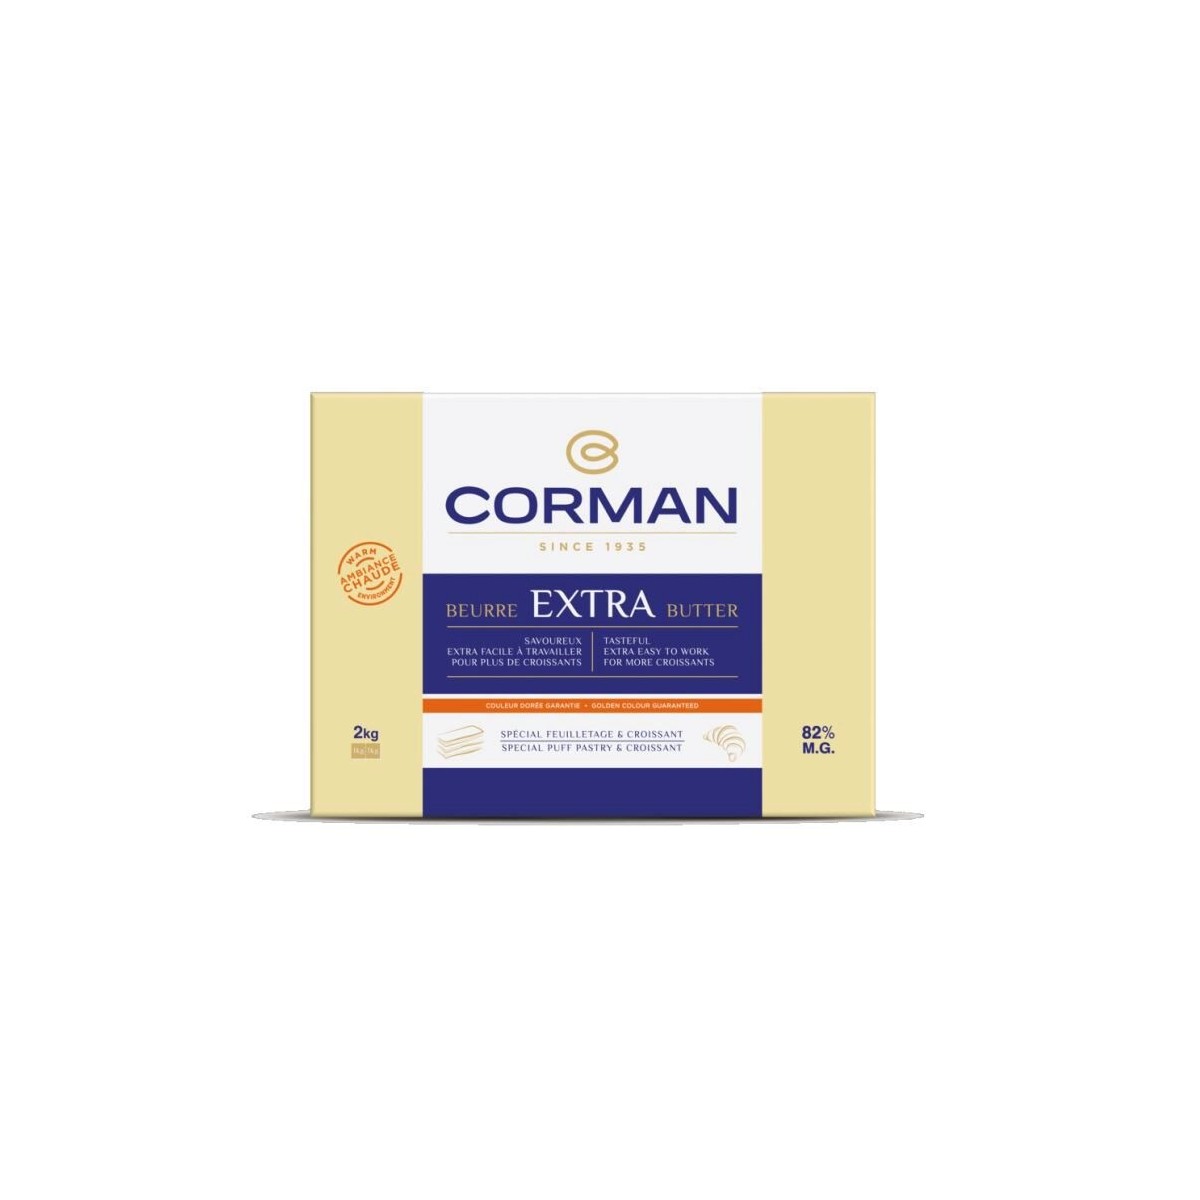 CORMAN BEURRE EXTRA 82% AMBIANCE CHAUDE FEUILL. & CROISSANT 5 X 2 KG 26850901